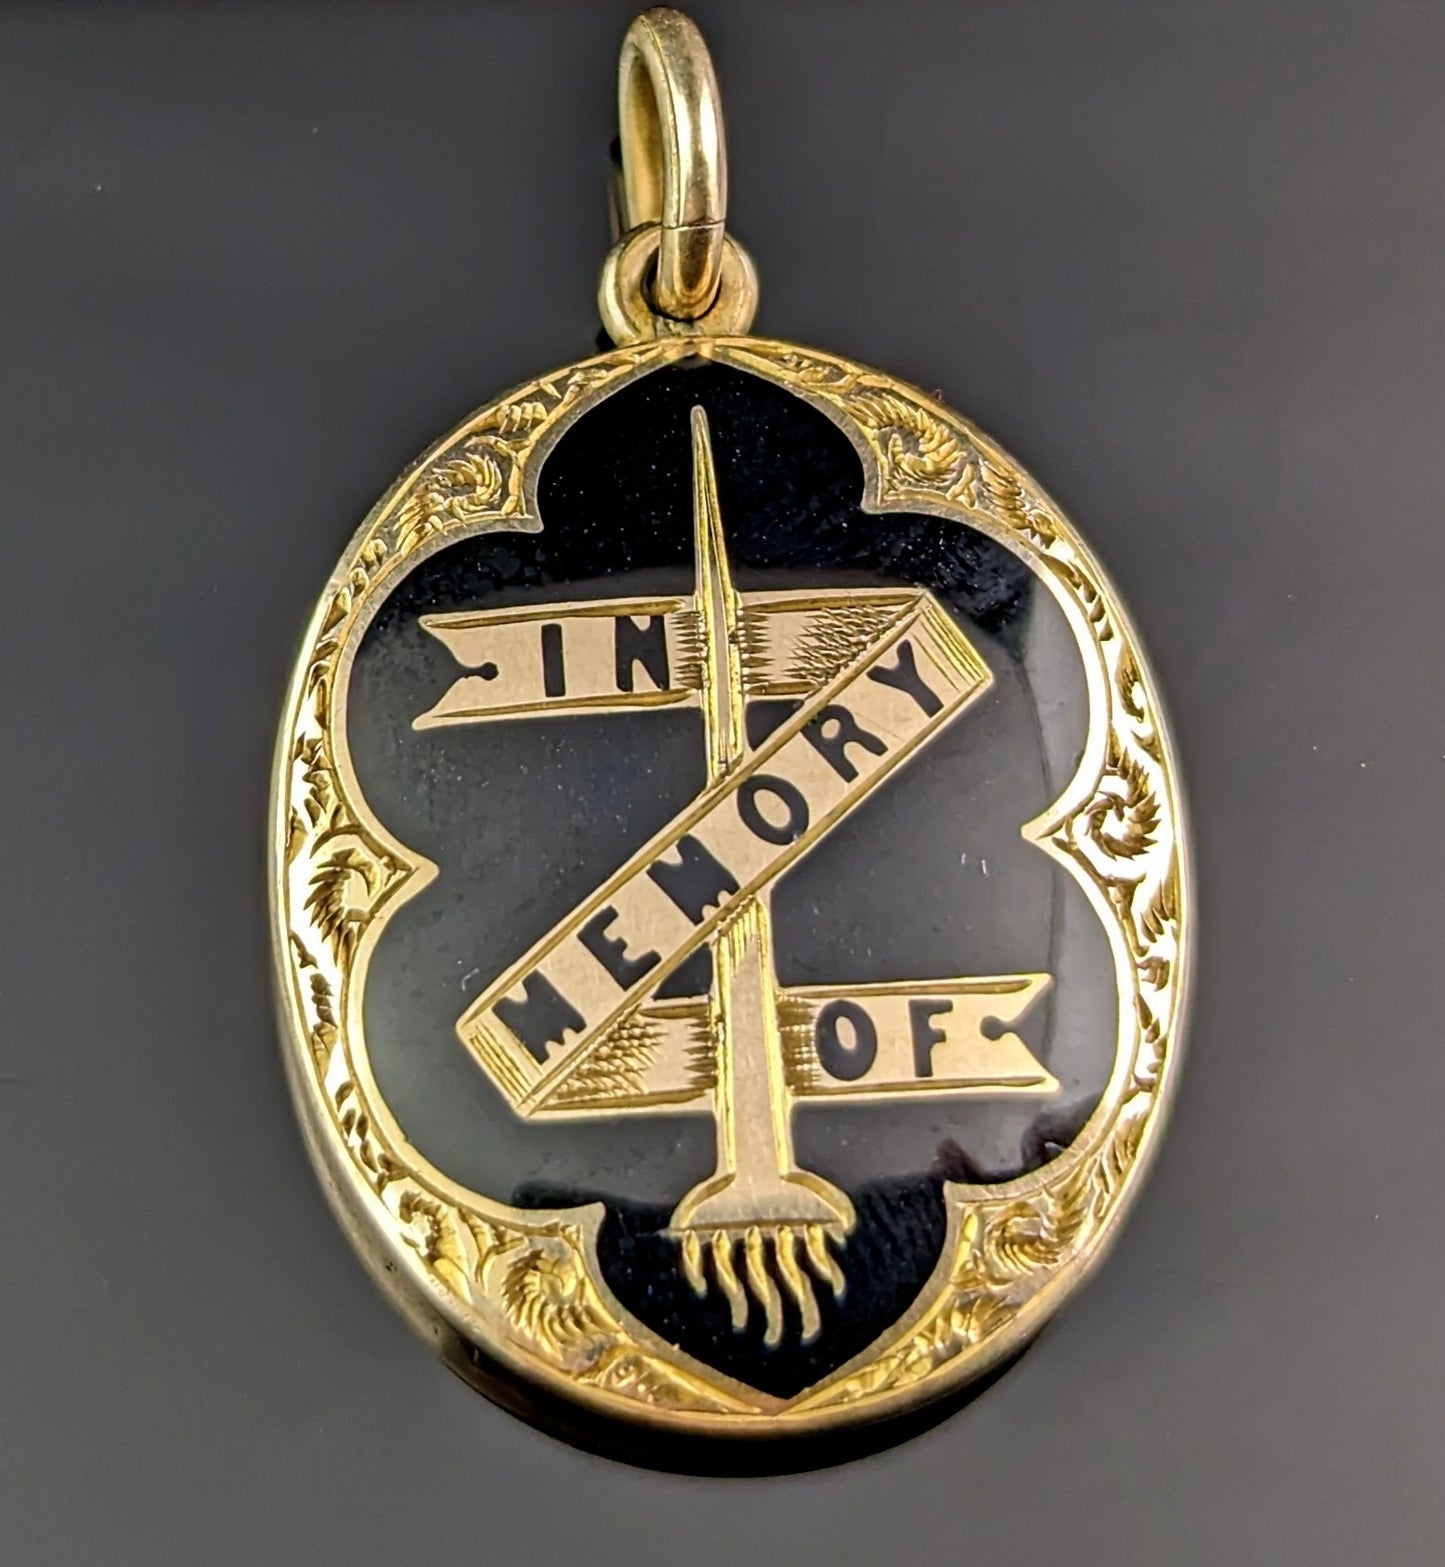 Antique Mourning locket, 9ct gold and Black enamel, In Memory Of